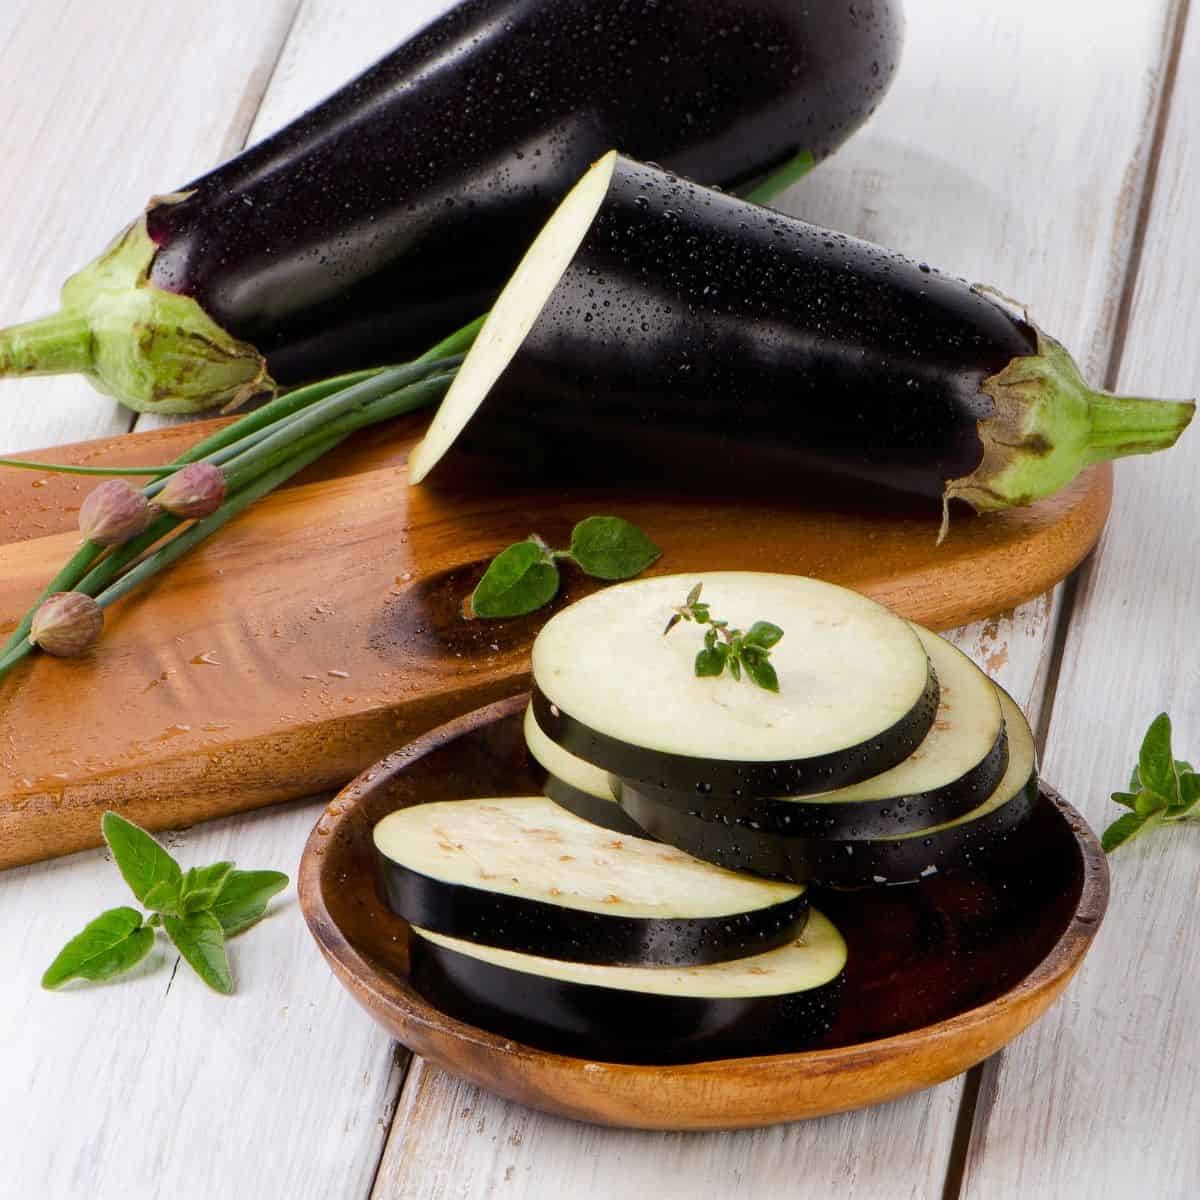 How To Tell If Eggplant Is Bad: Some Important Tips